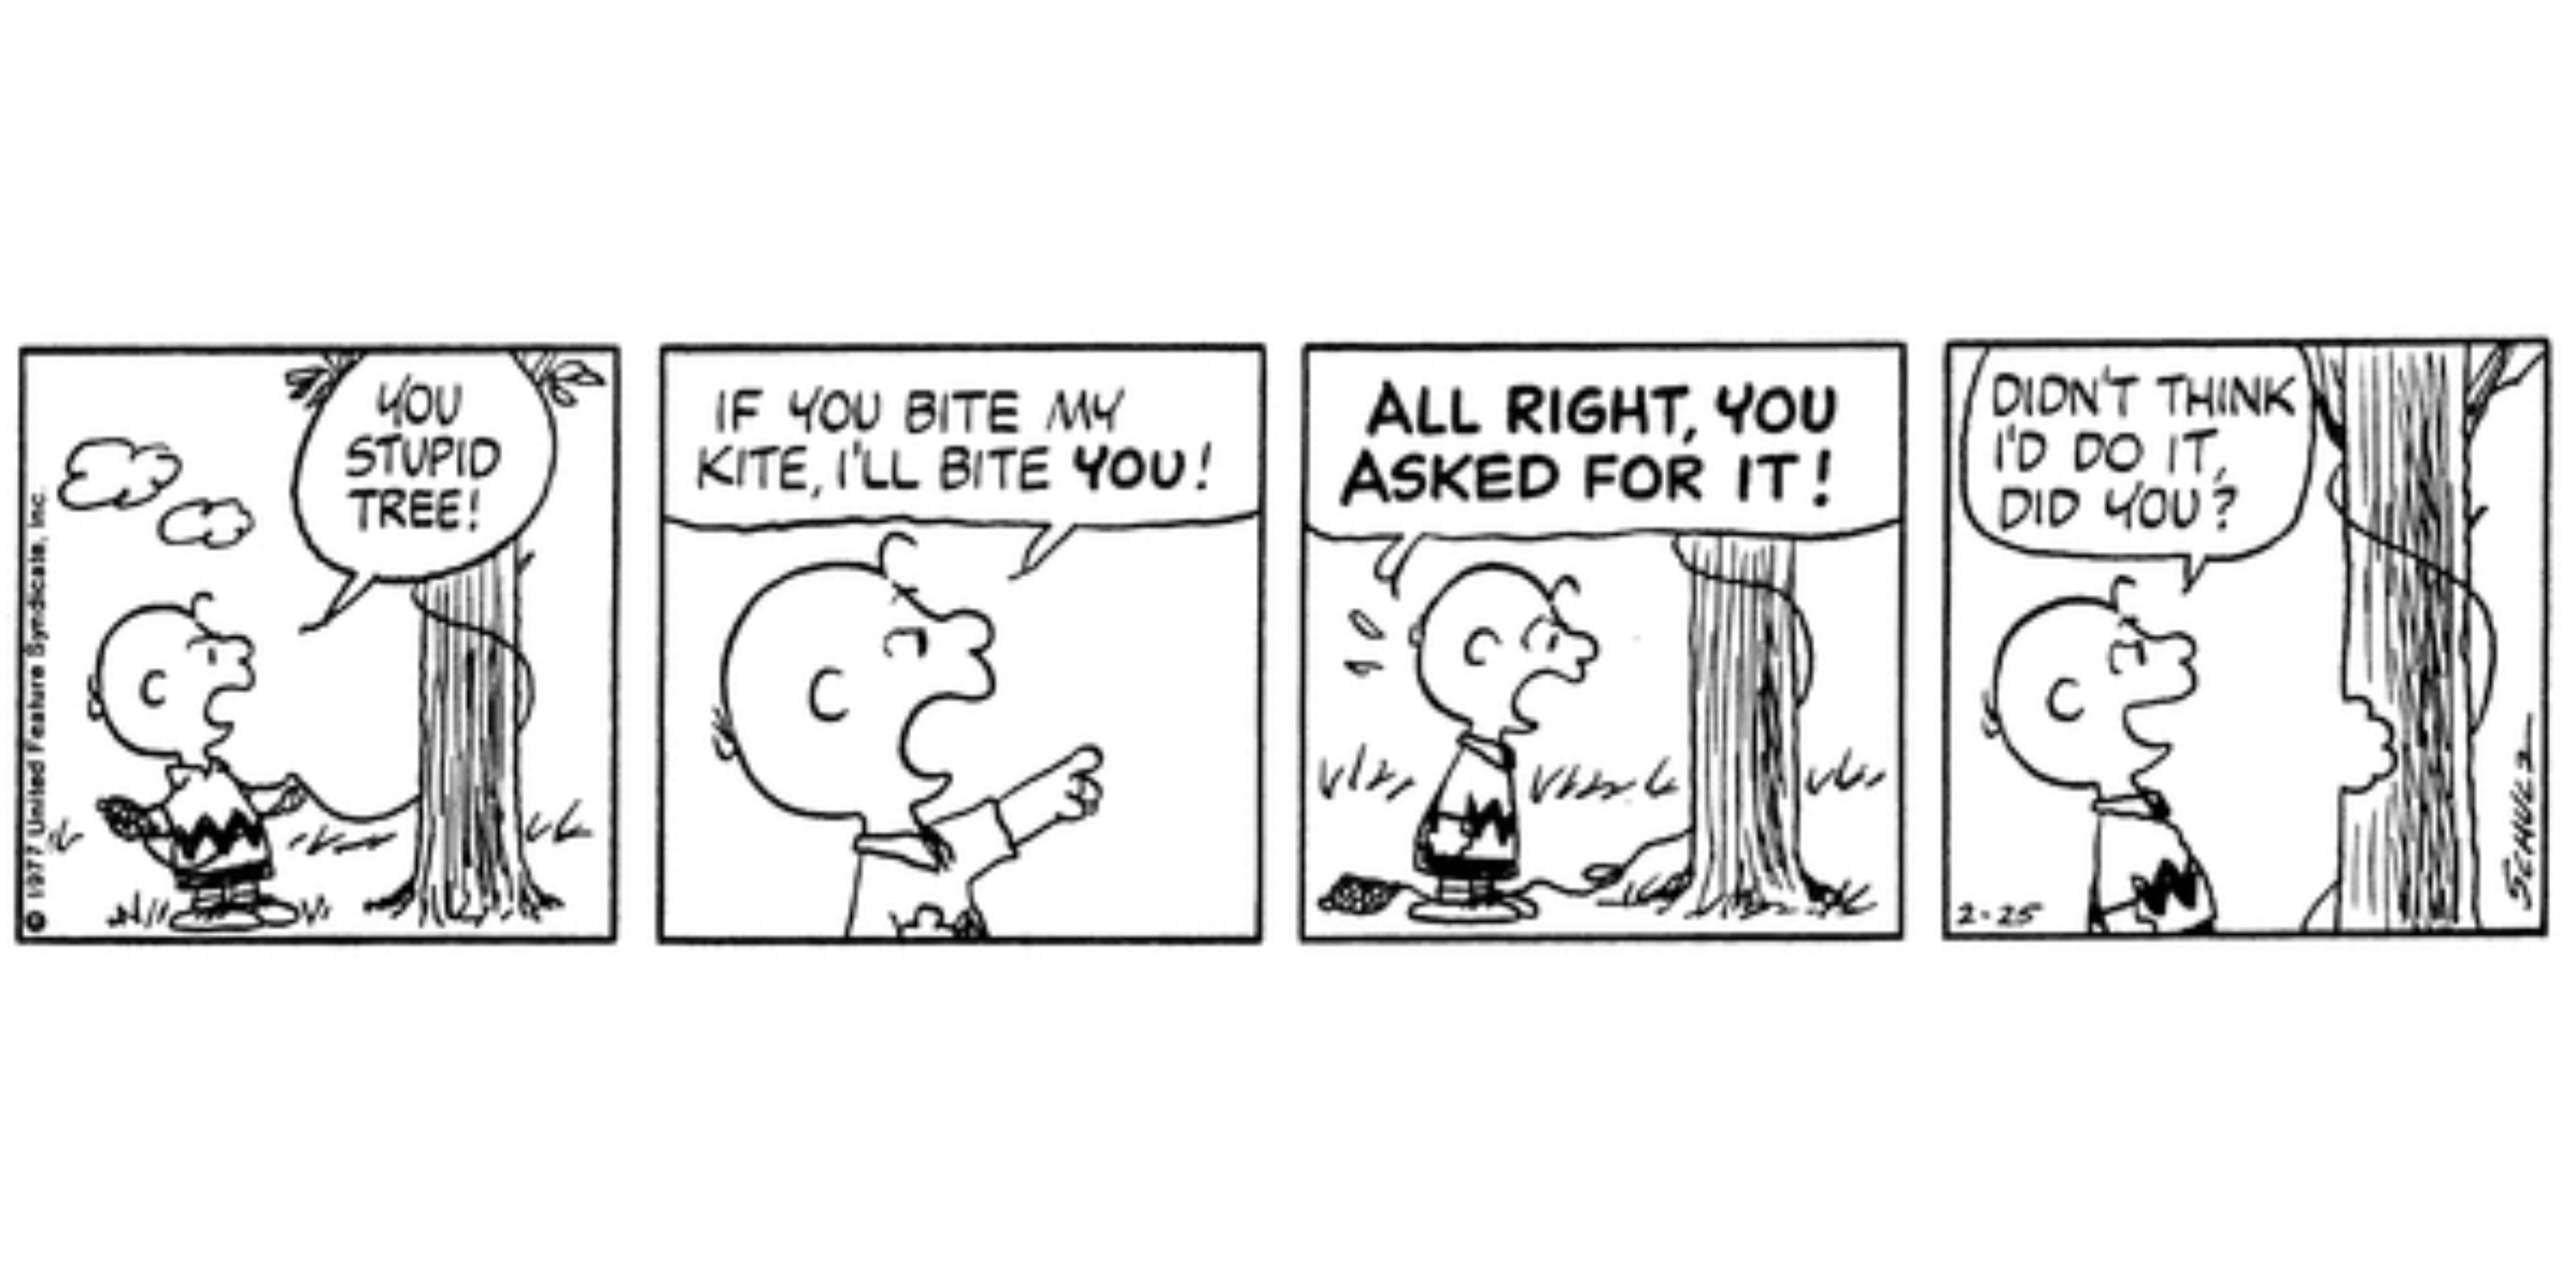 Charlie Brown and the Kite Eating Tree in Peanuts.